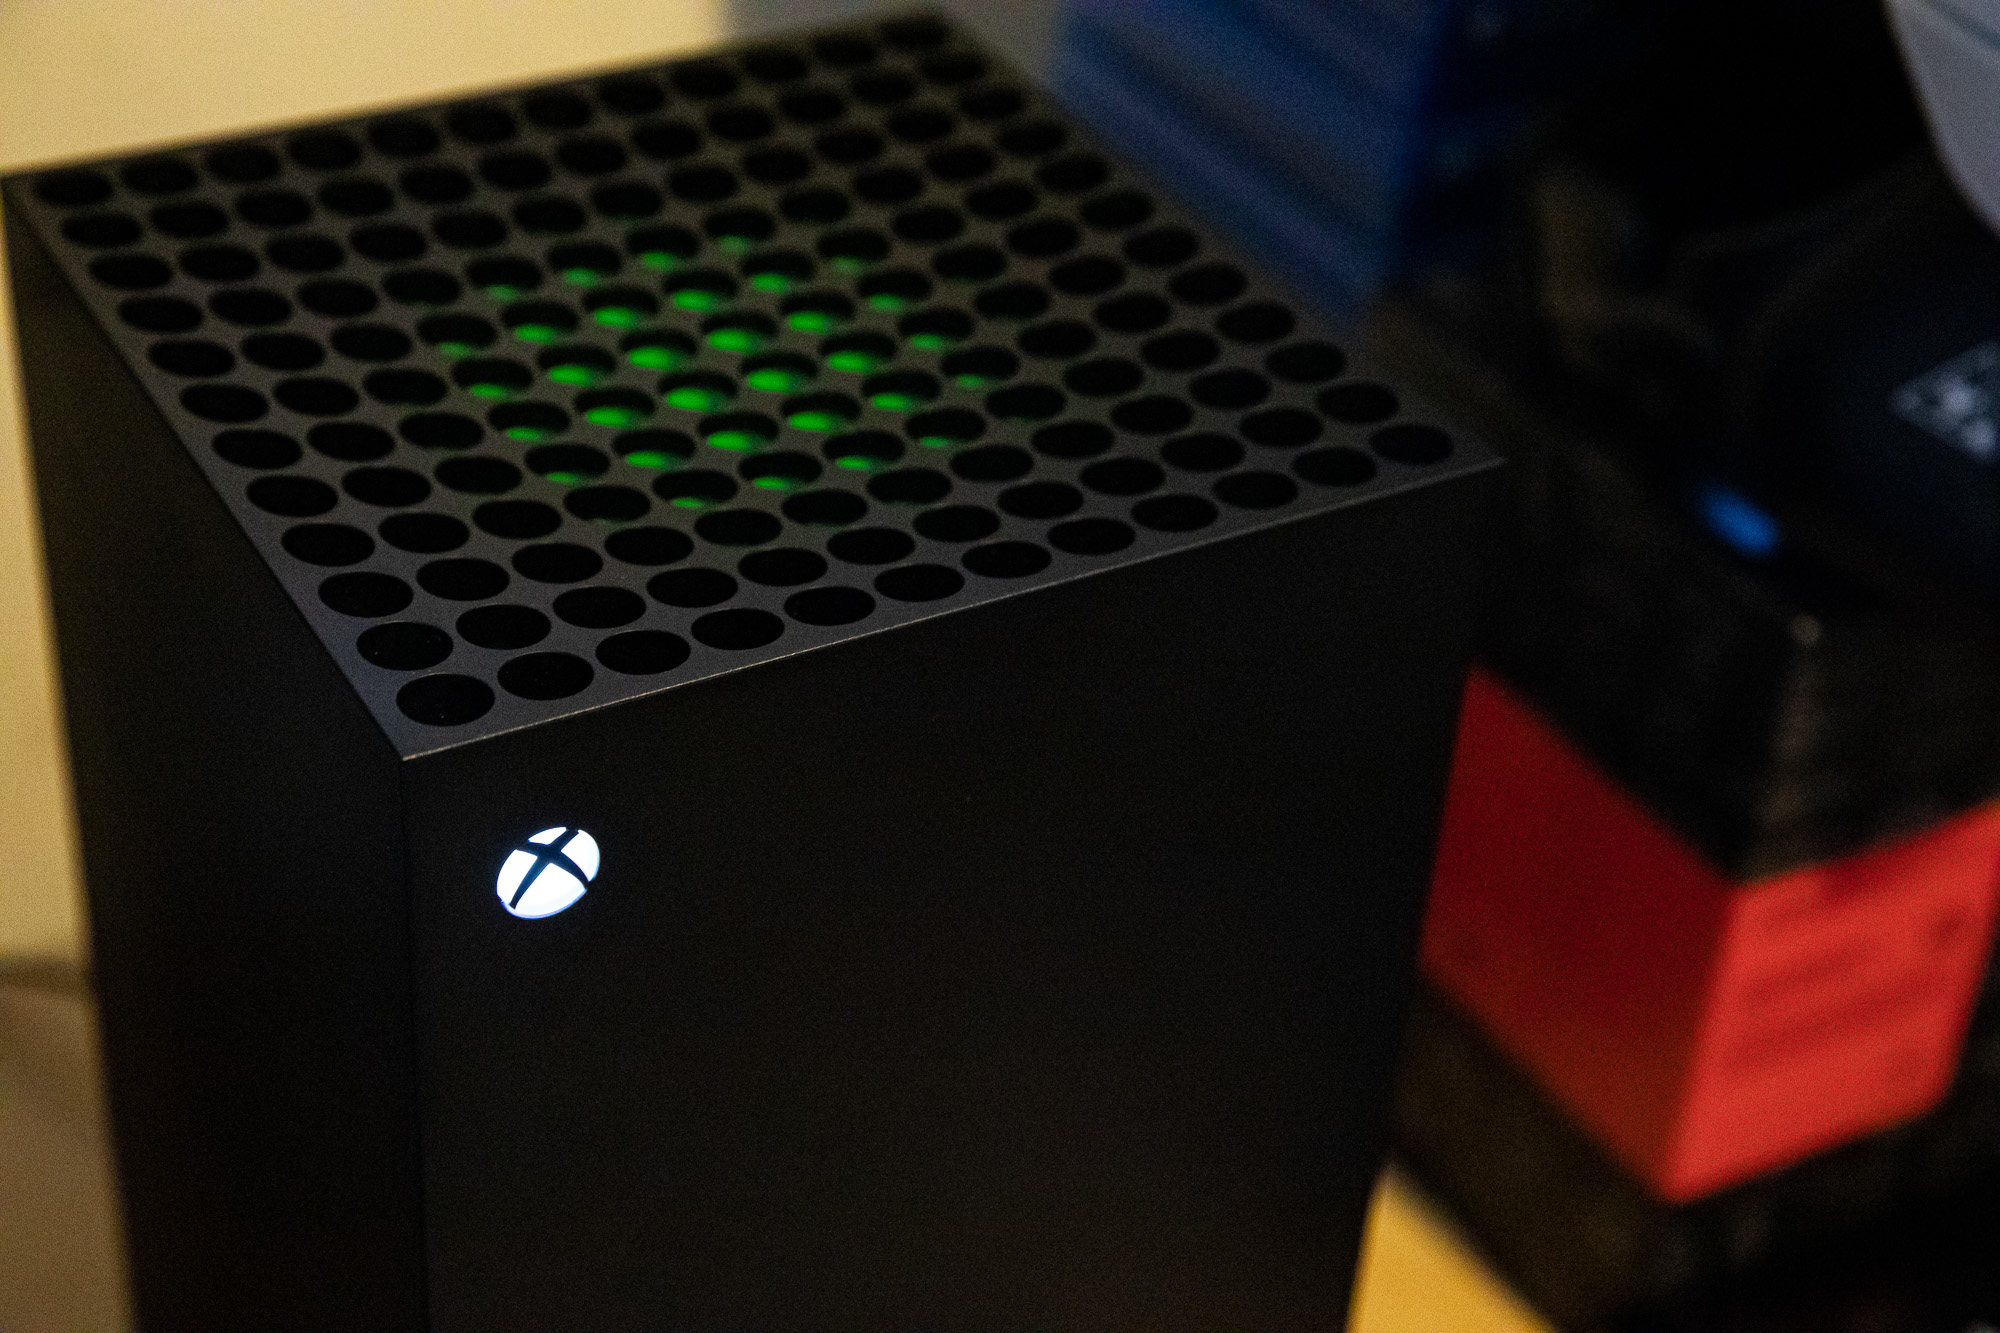  Microsoft Says Xbox Series X Shortage Could Last Well Into 2021